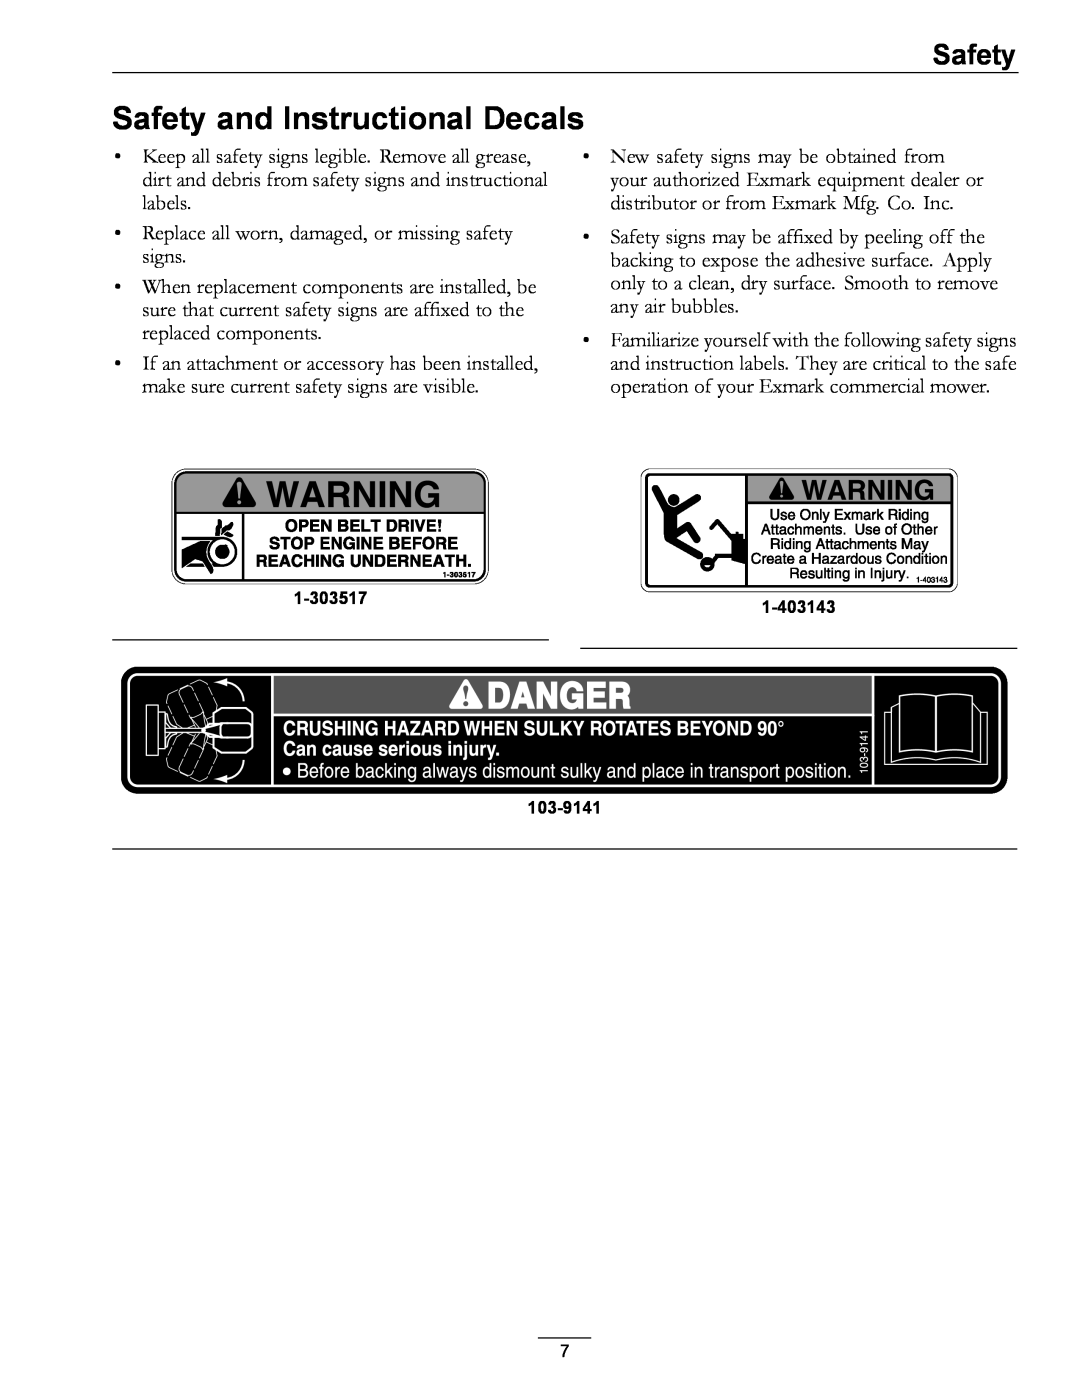 Exmark 4500-435 manual Safety and Instructional Decals 